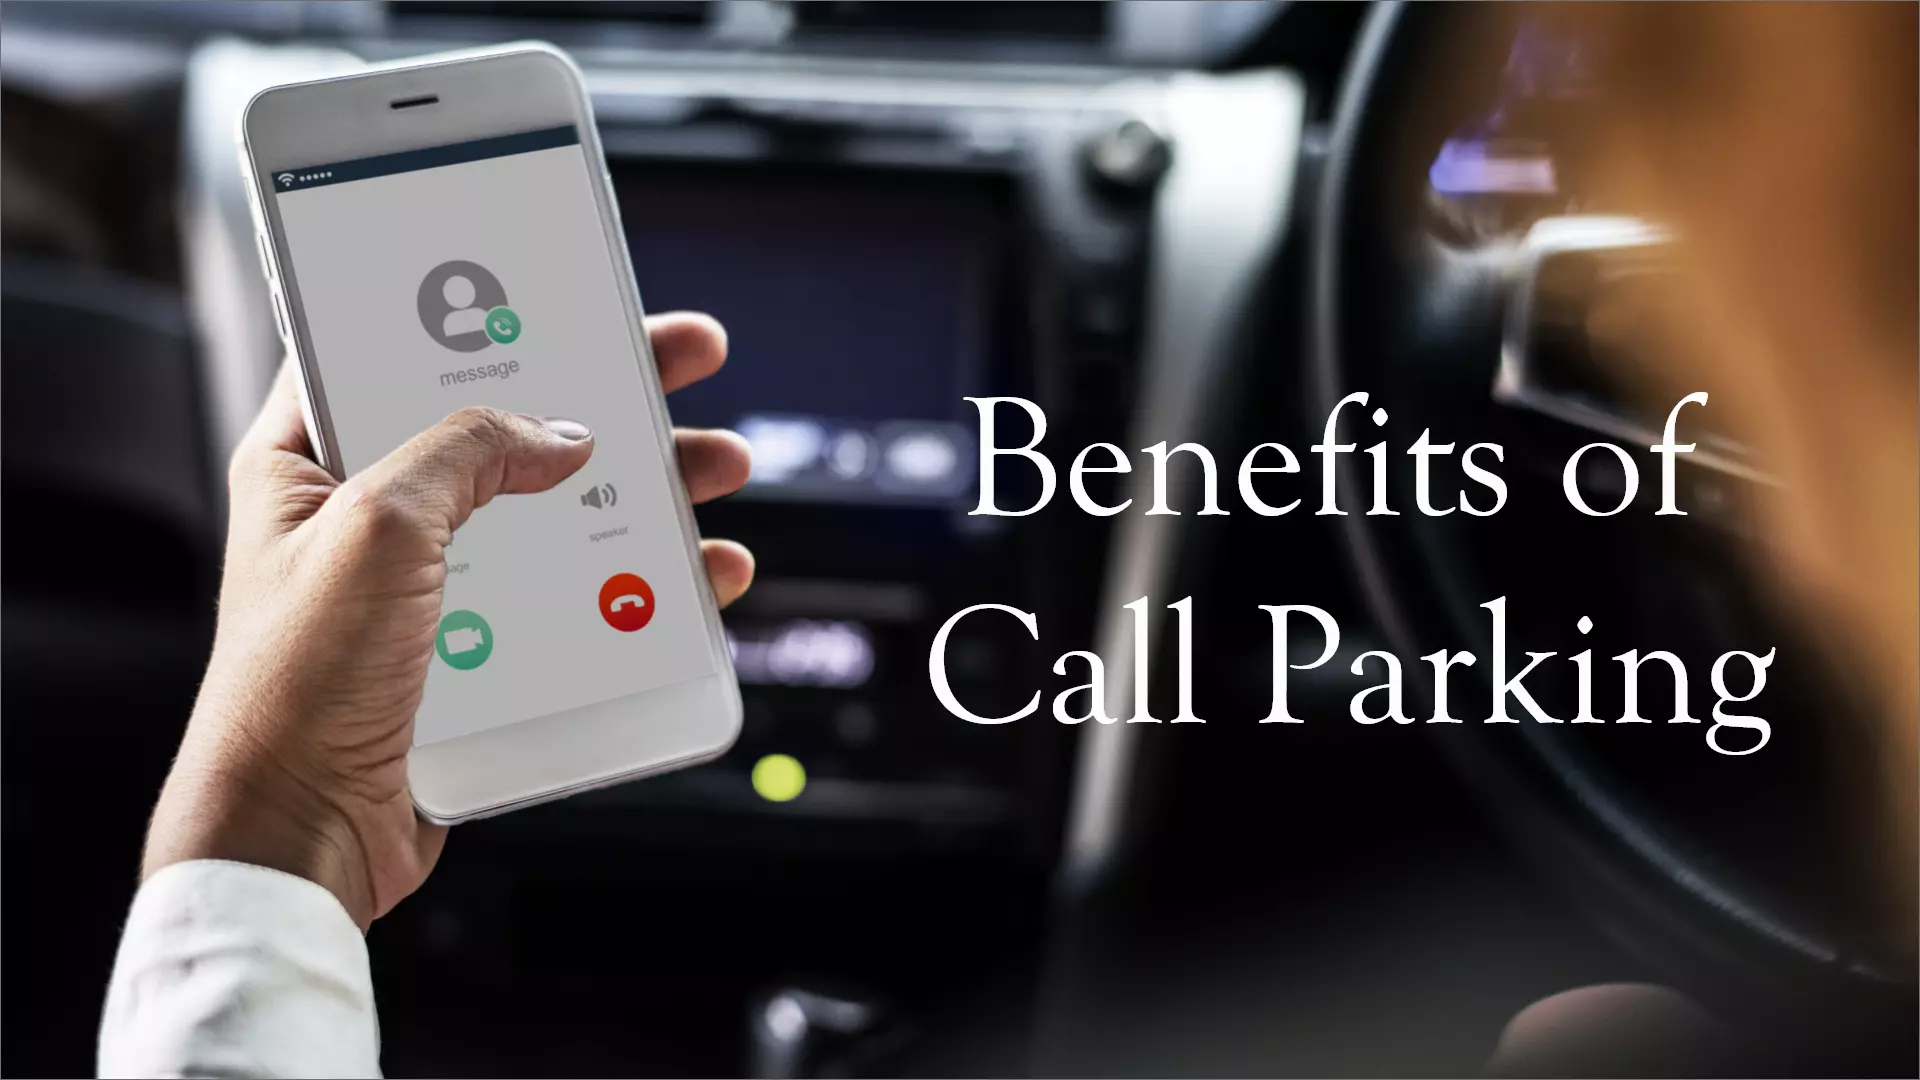 Benefits of Call Parking